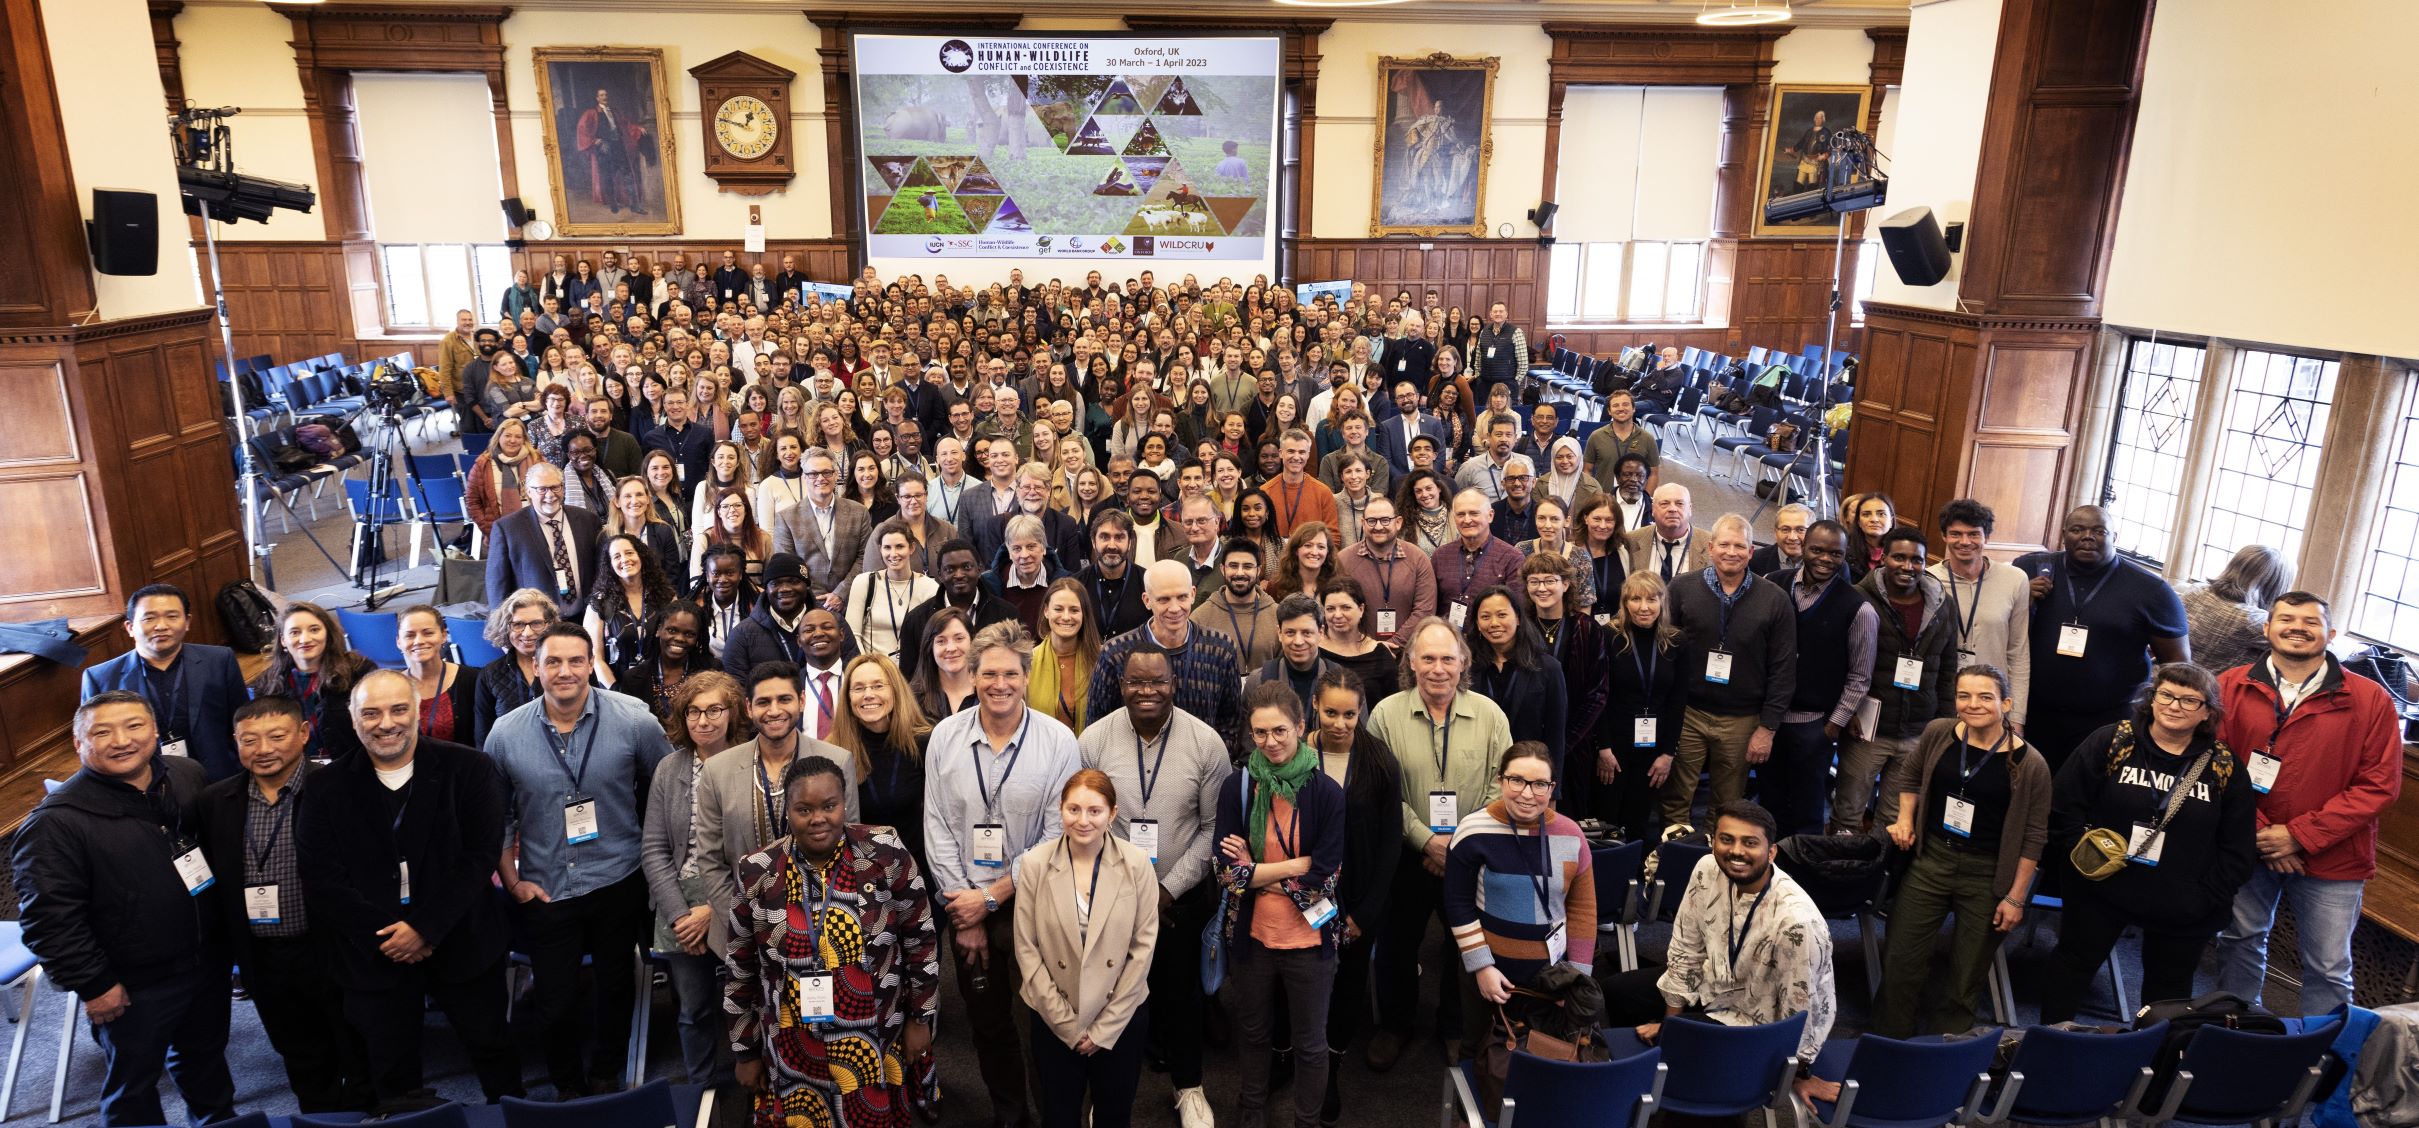 Attendees of the International Conference on Human-Wildlife Conflict and Coexistence in Oxford, UK.